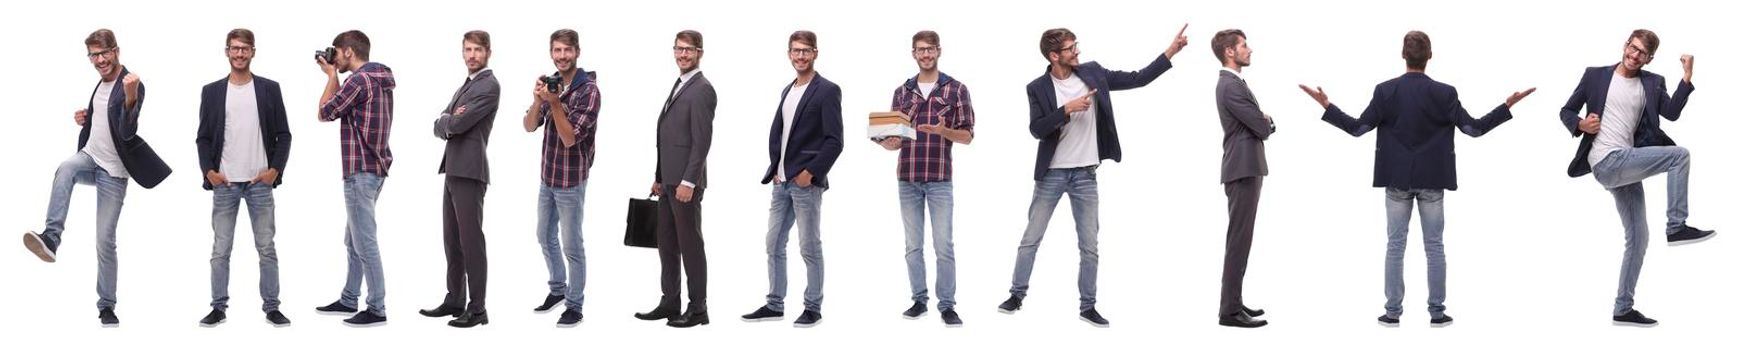 panoramic collage of self-motivated young man .isolated on white background